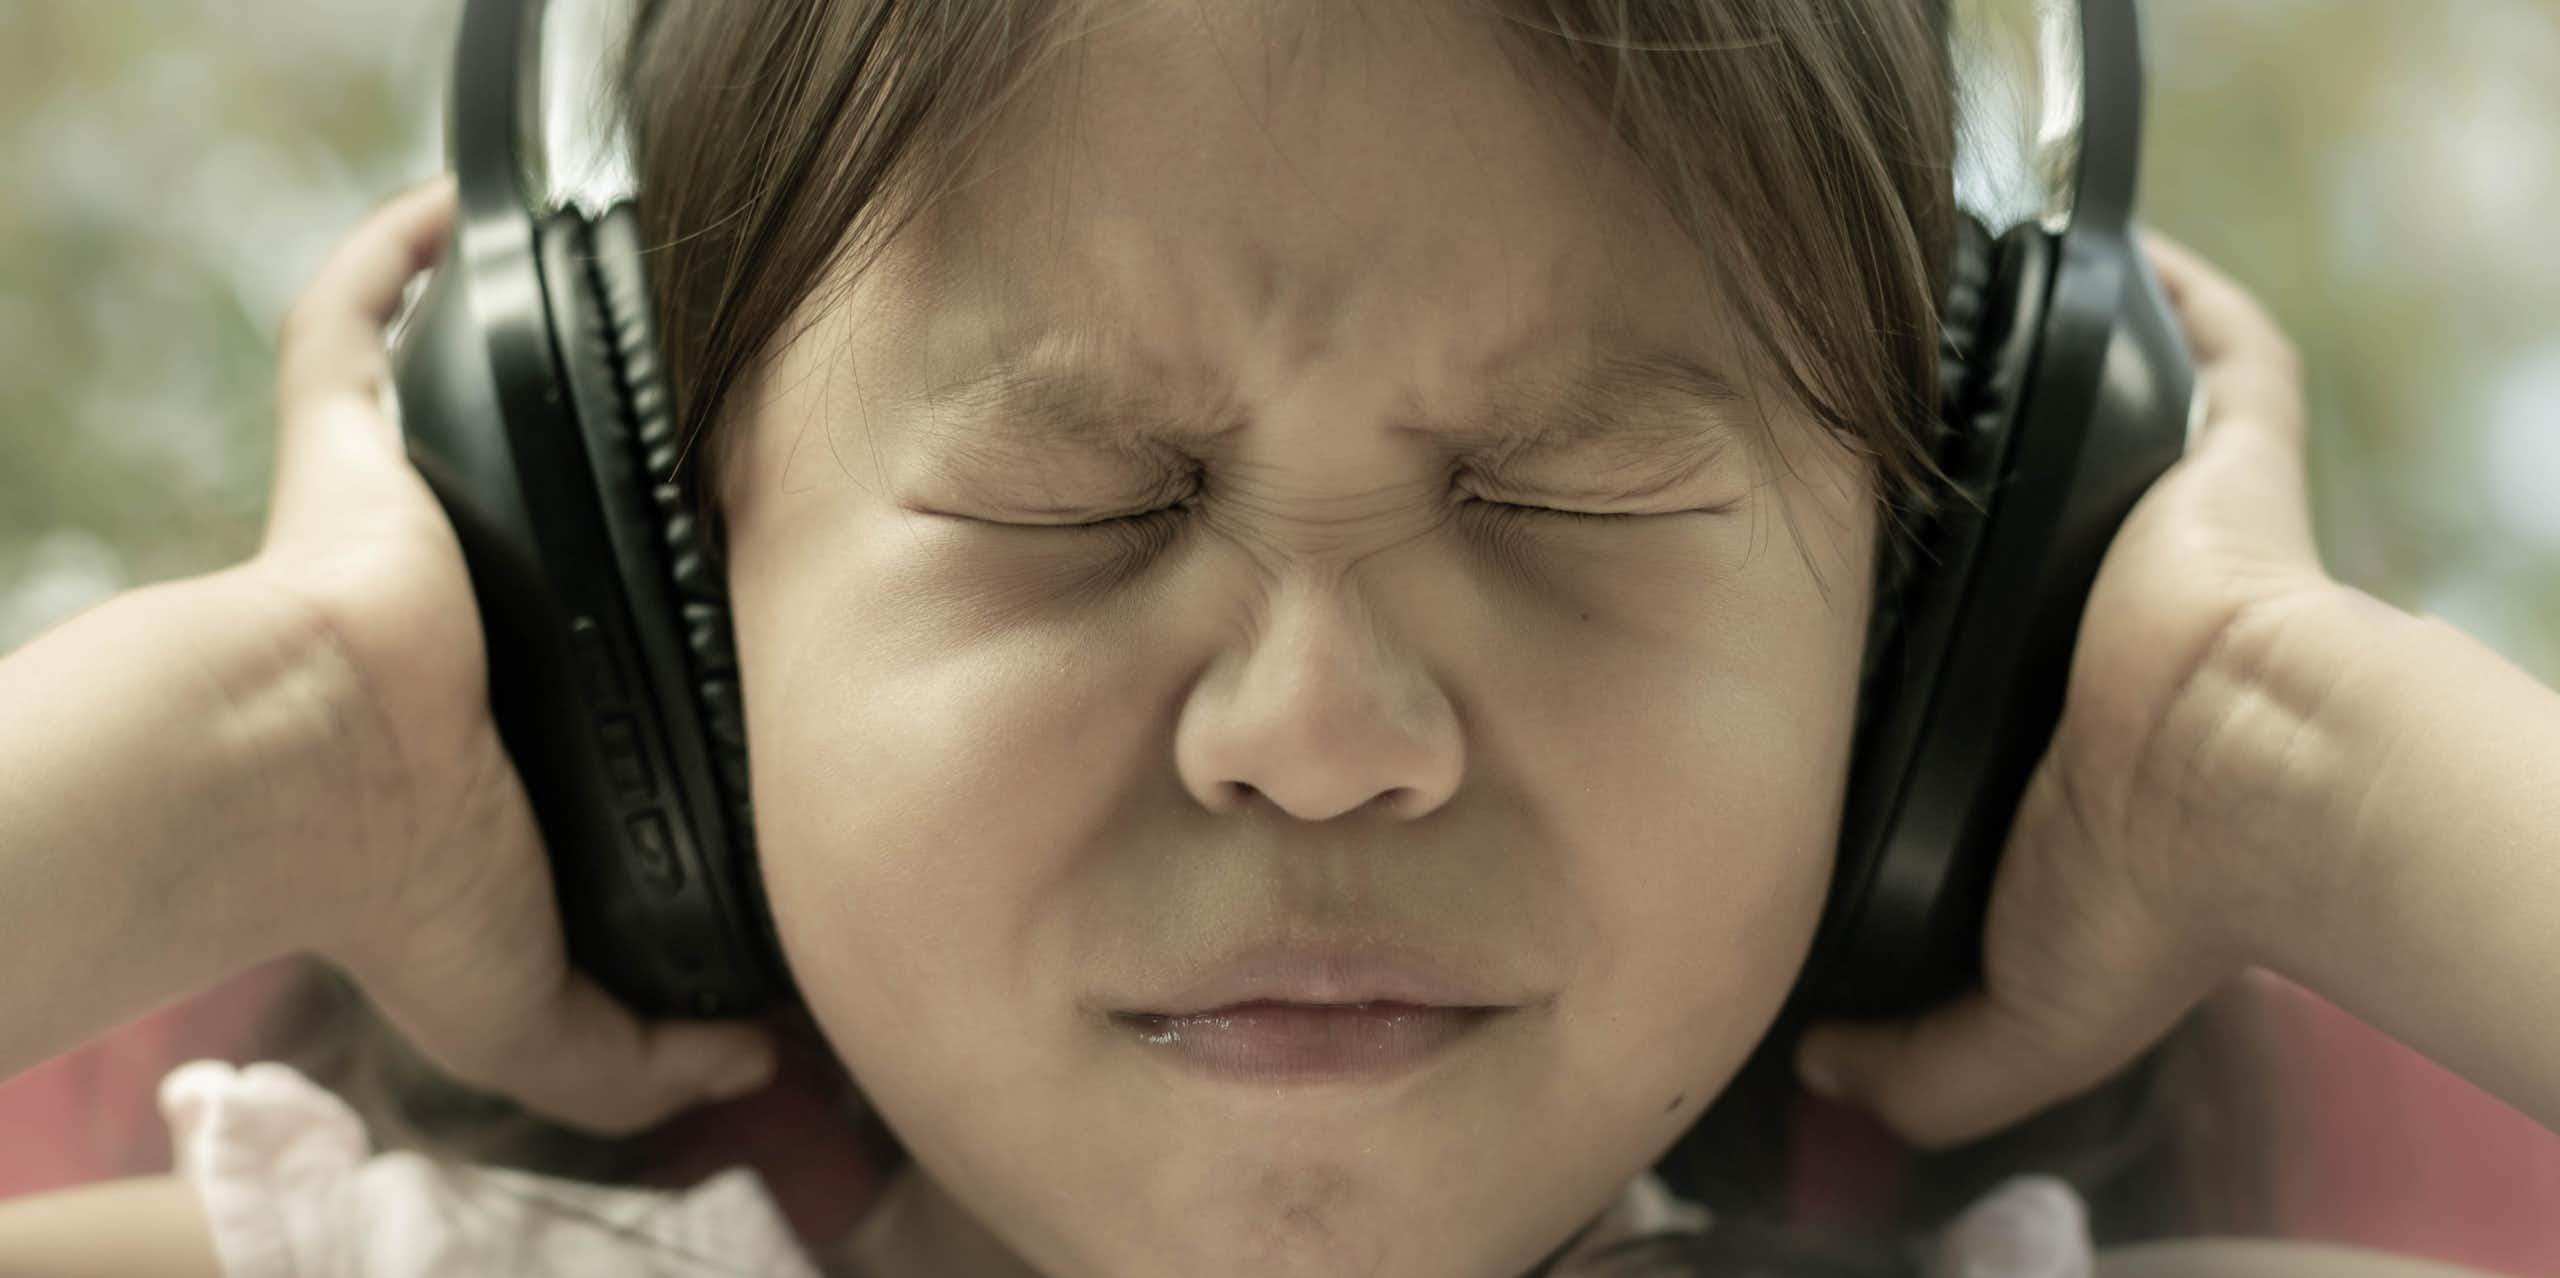 girl shuts eyes tightly and pushes headphones against ears